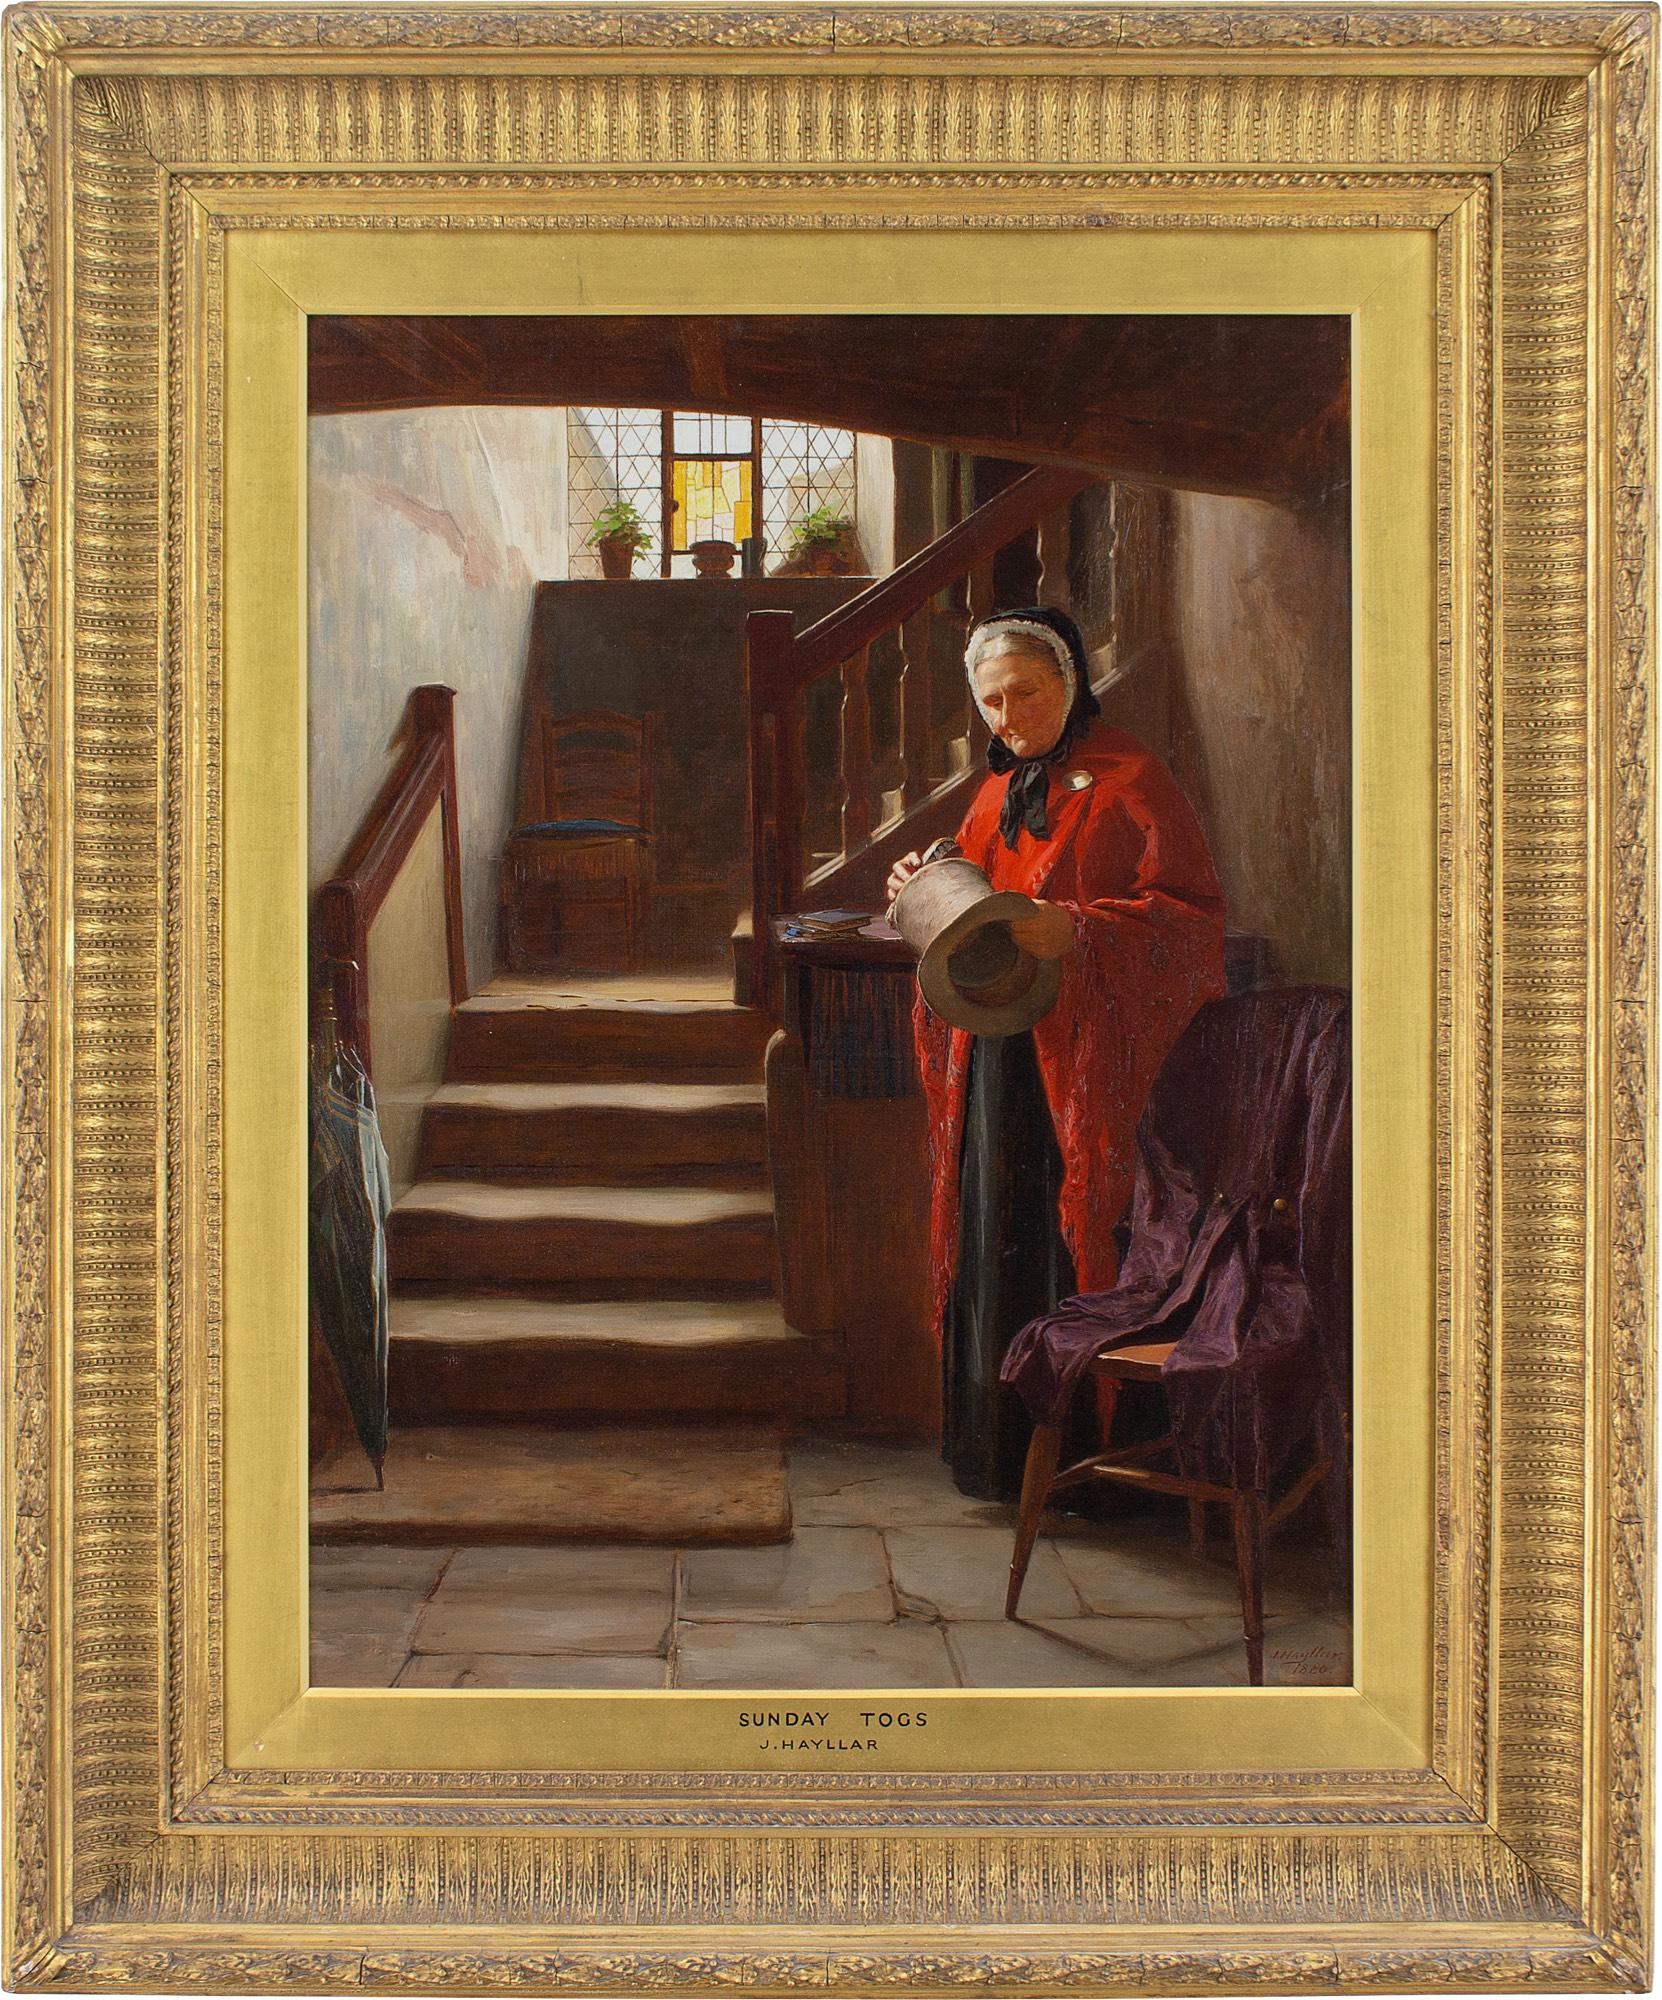 This late 19th-century oil painting by British artist James Hayllar (1829-1920) depicts an elderly woman standing by a flight of stairs while brushing a top hat. It was shown at an exhibition of The Society of British Artists at Suffolk Street,